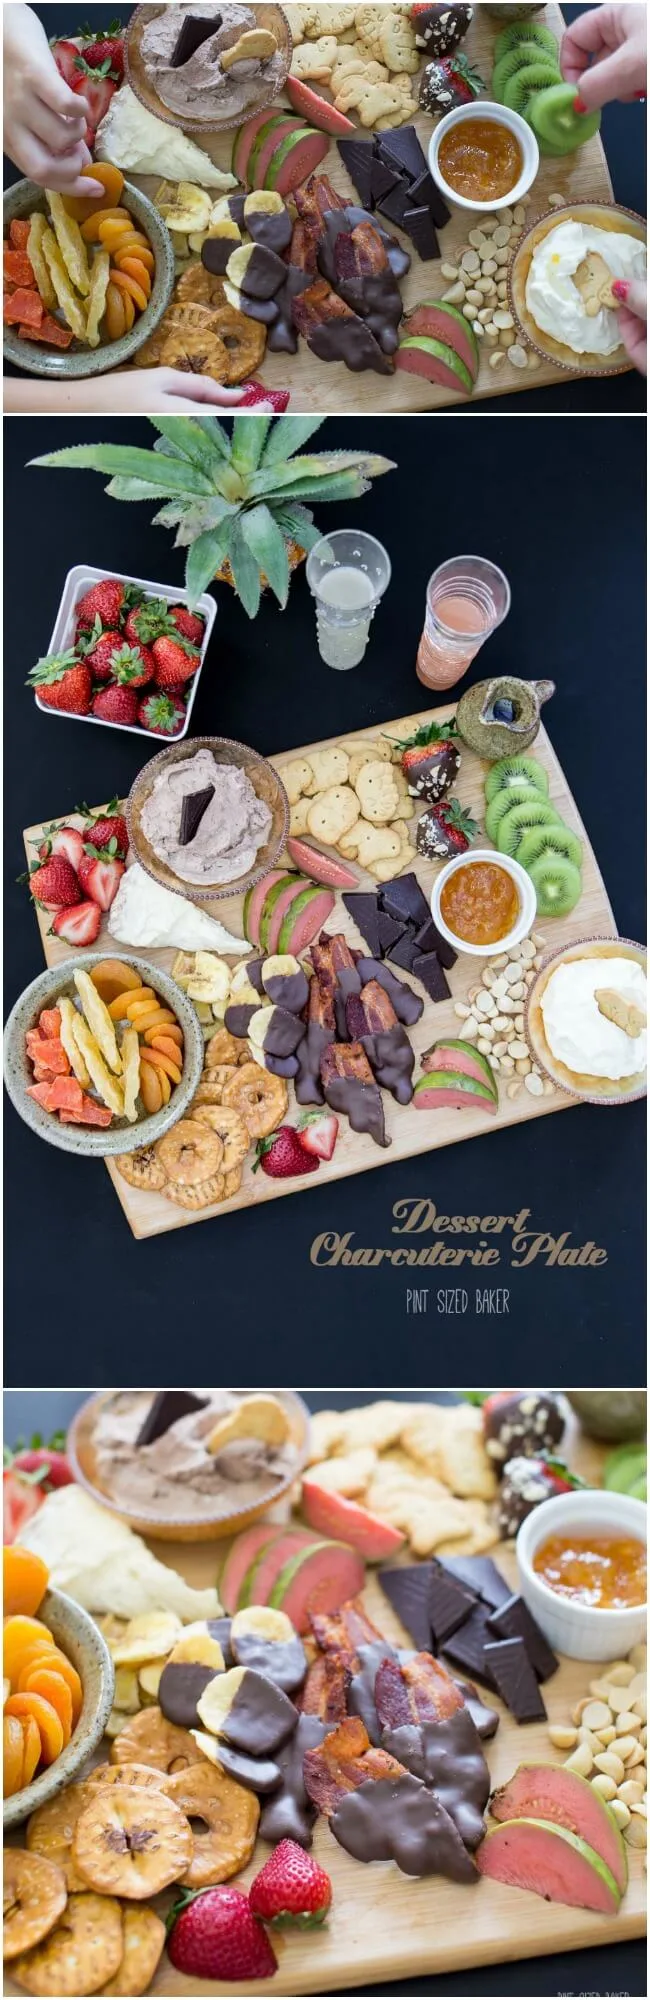 Fresh fruit, chocolate, animal crackers, and whipped cream make up a great dessert charcuterie plate.